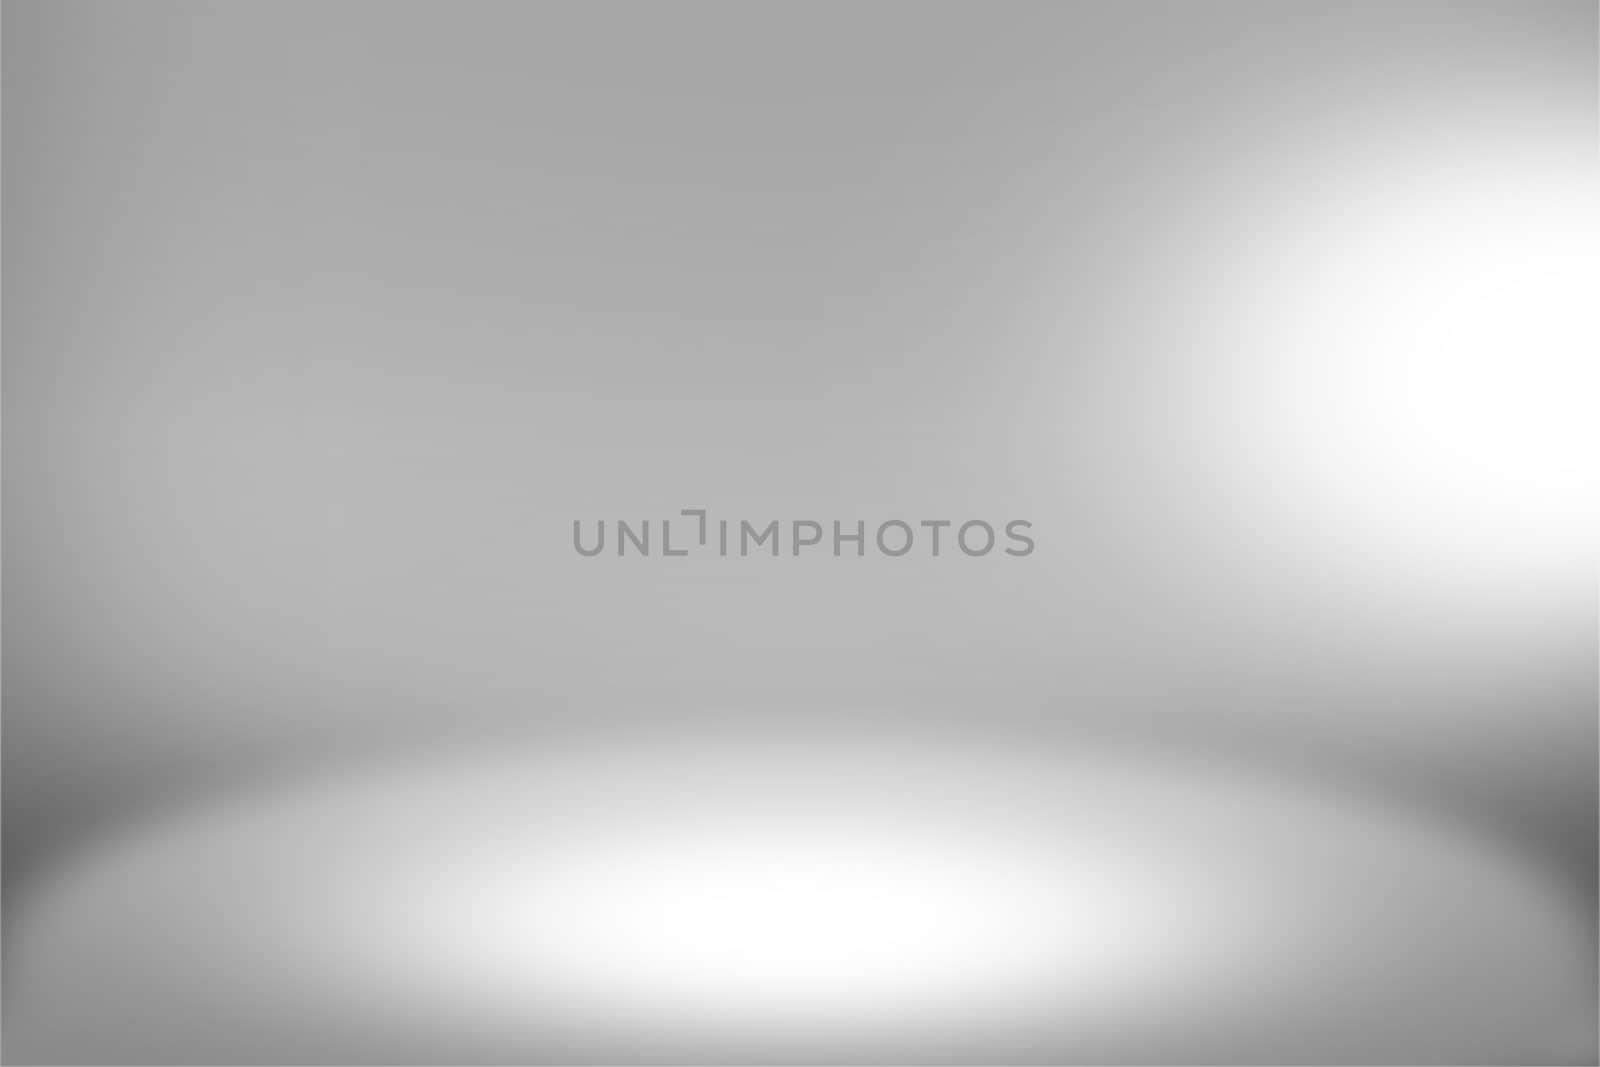 Product Showscase Spotlight Background - White, Clear, Round Photographer Studio by Loud-Mango